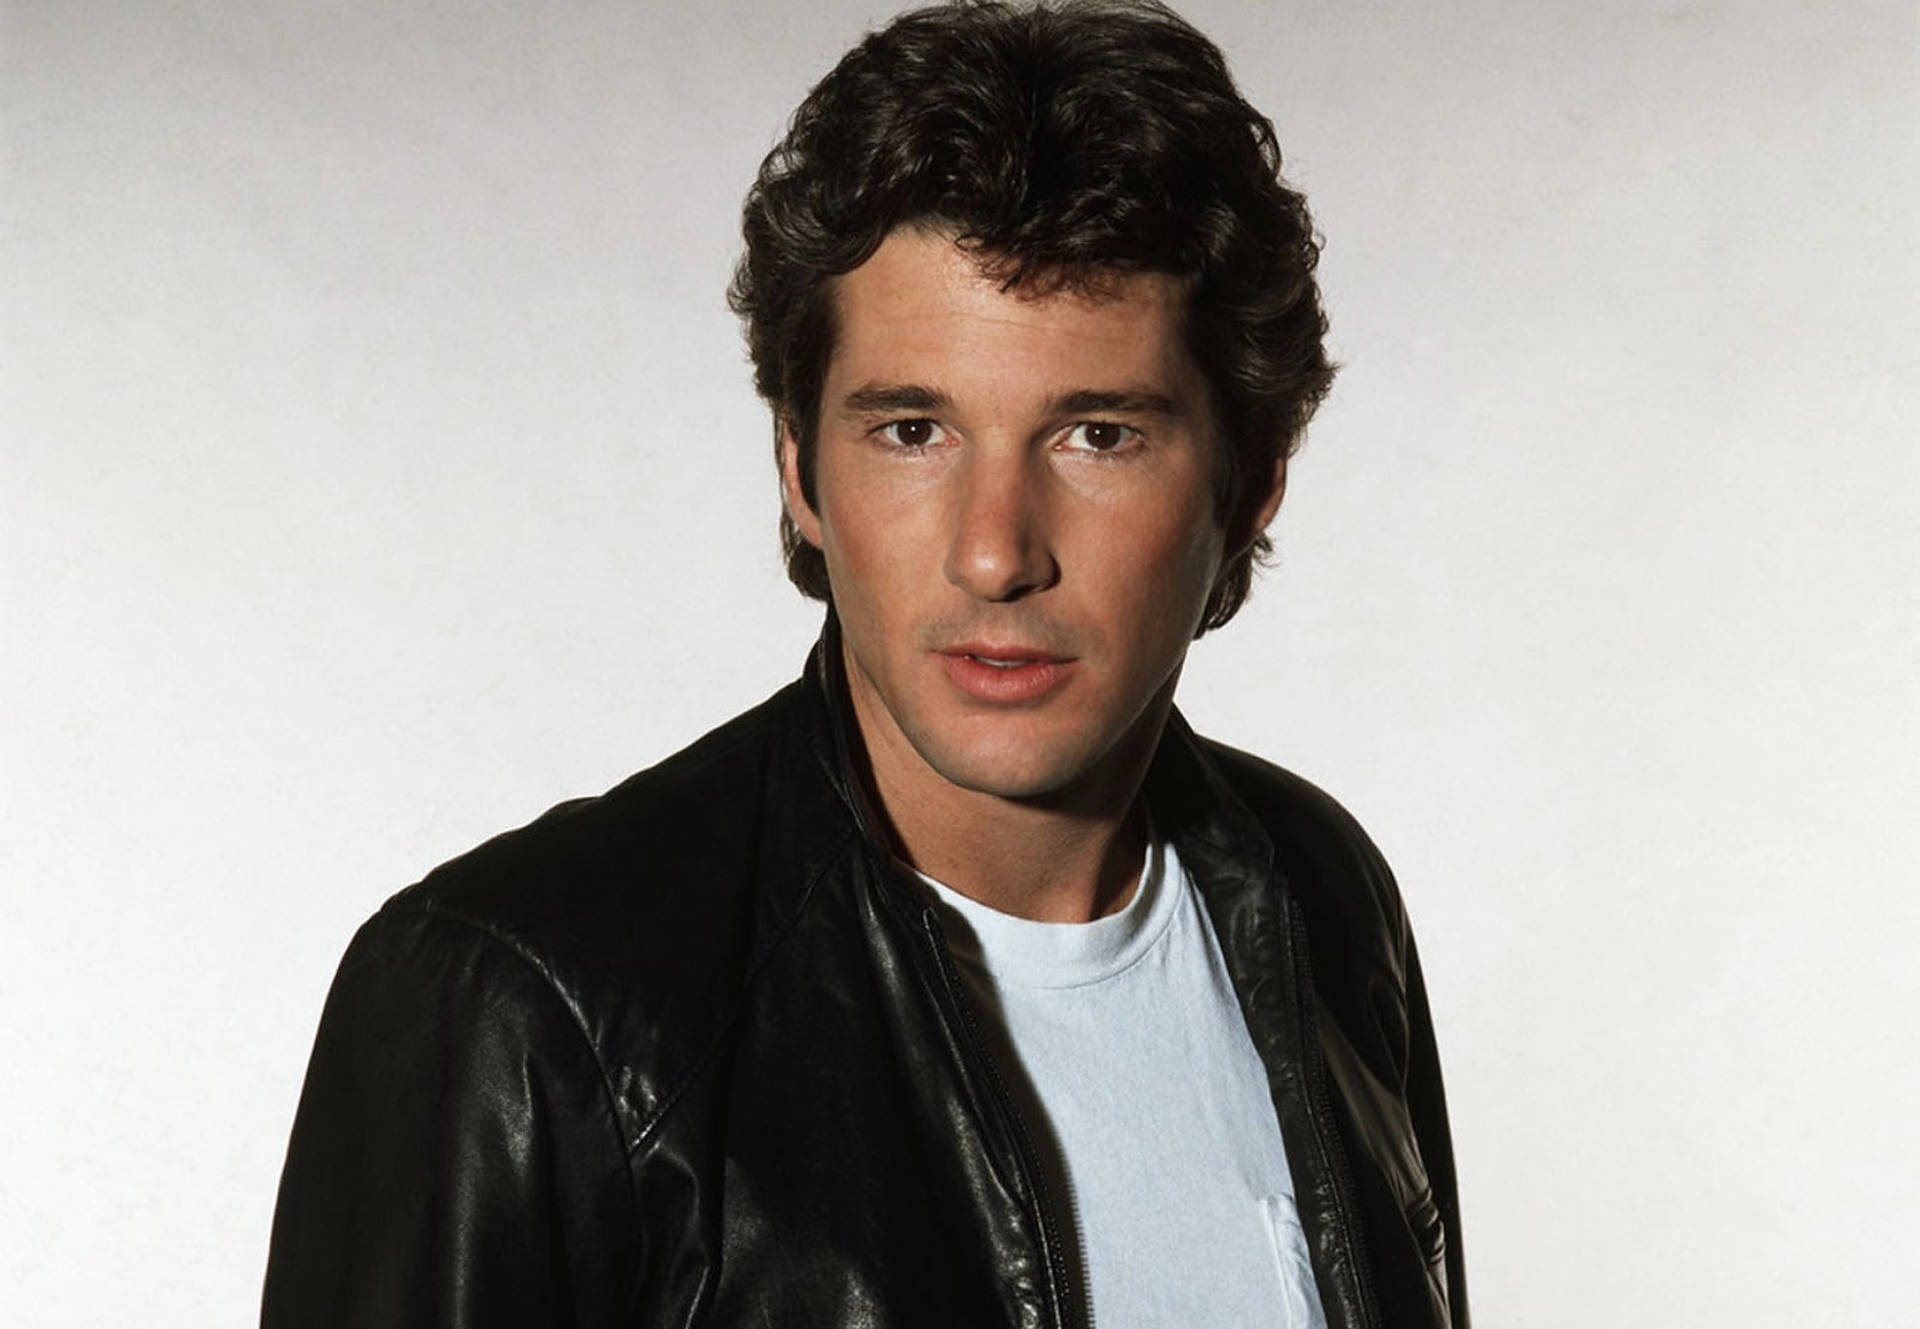 Captivating Portrait of a Young Richard Gere Wallpaper